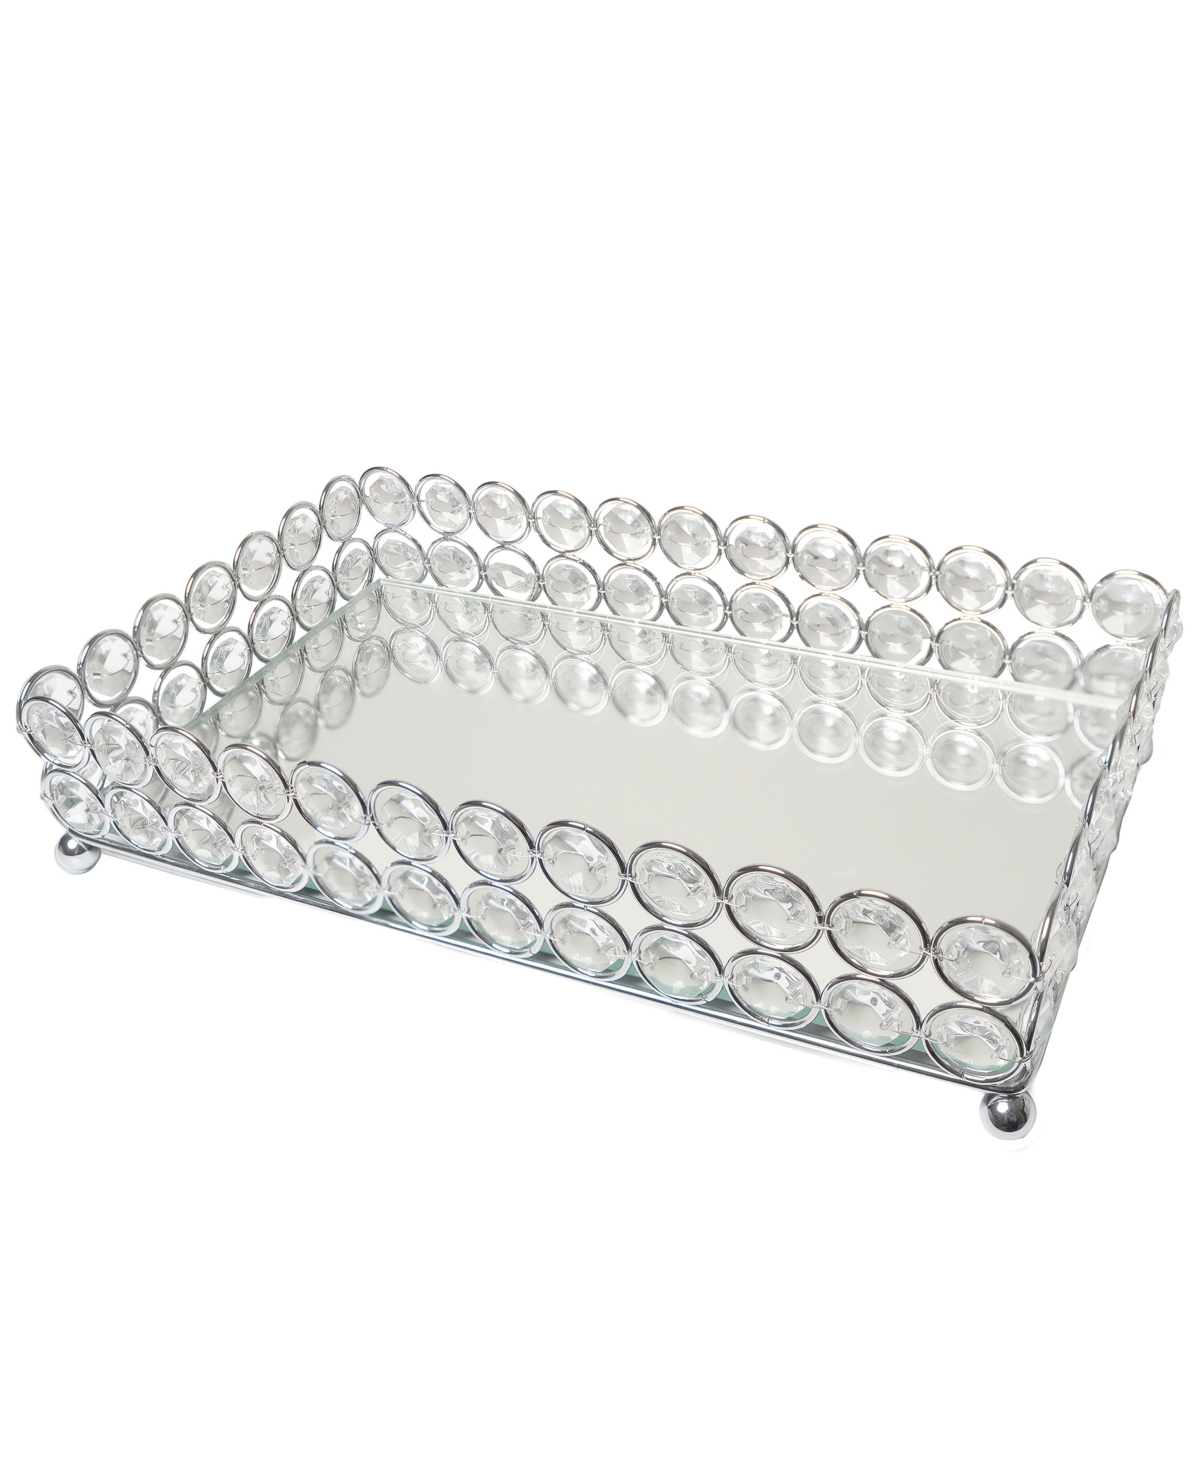 Elegant Designs Elipse Crystal Decorative Mirrored Jewelry Or Makeup Vanity Organizer Tray In Chrome